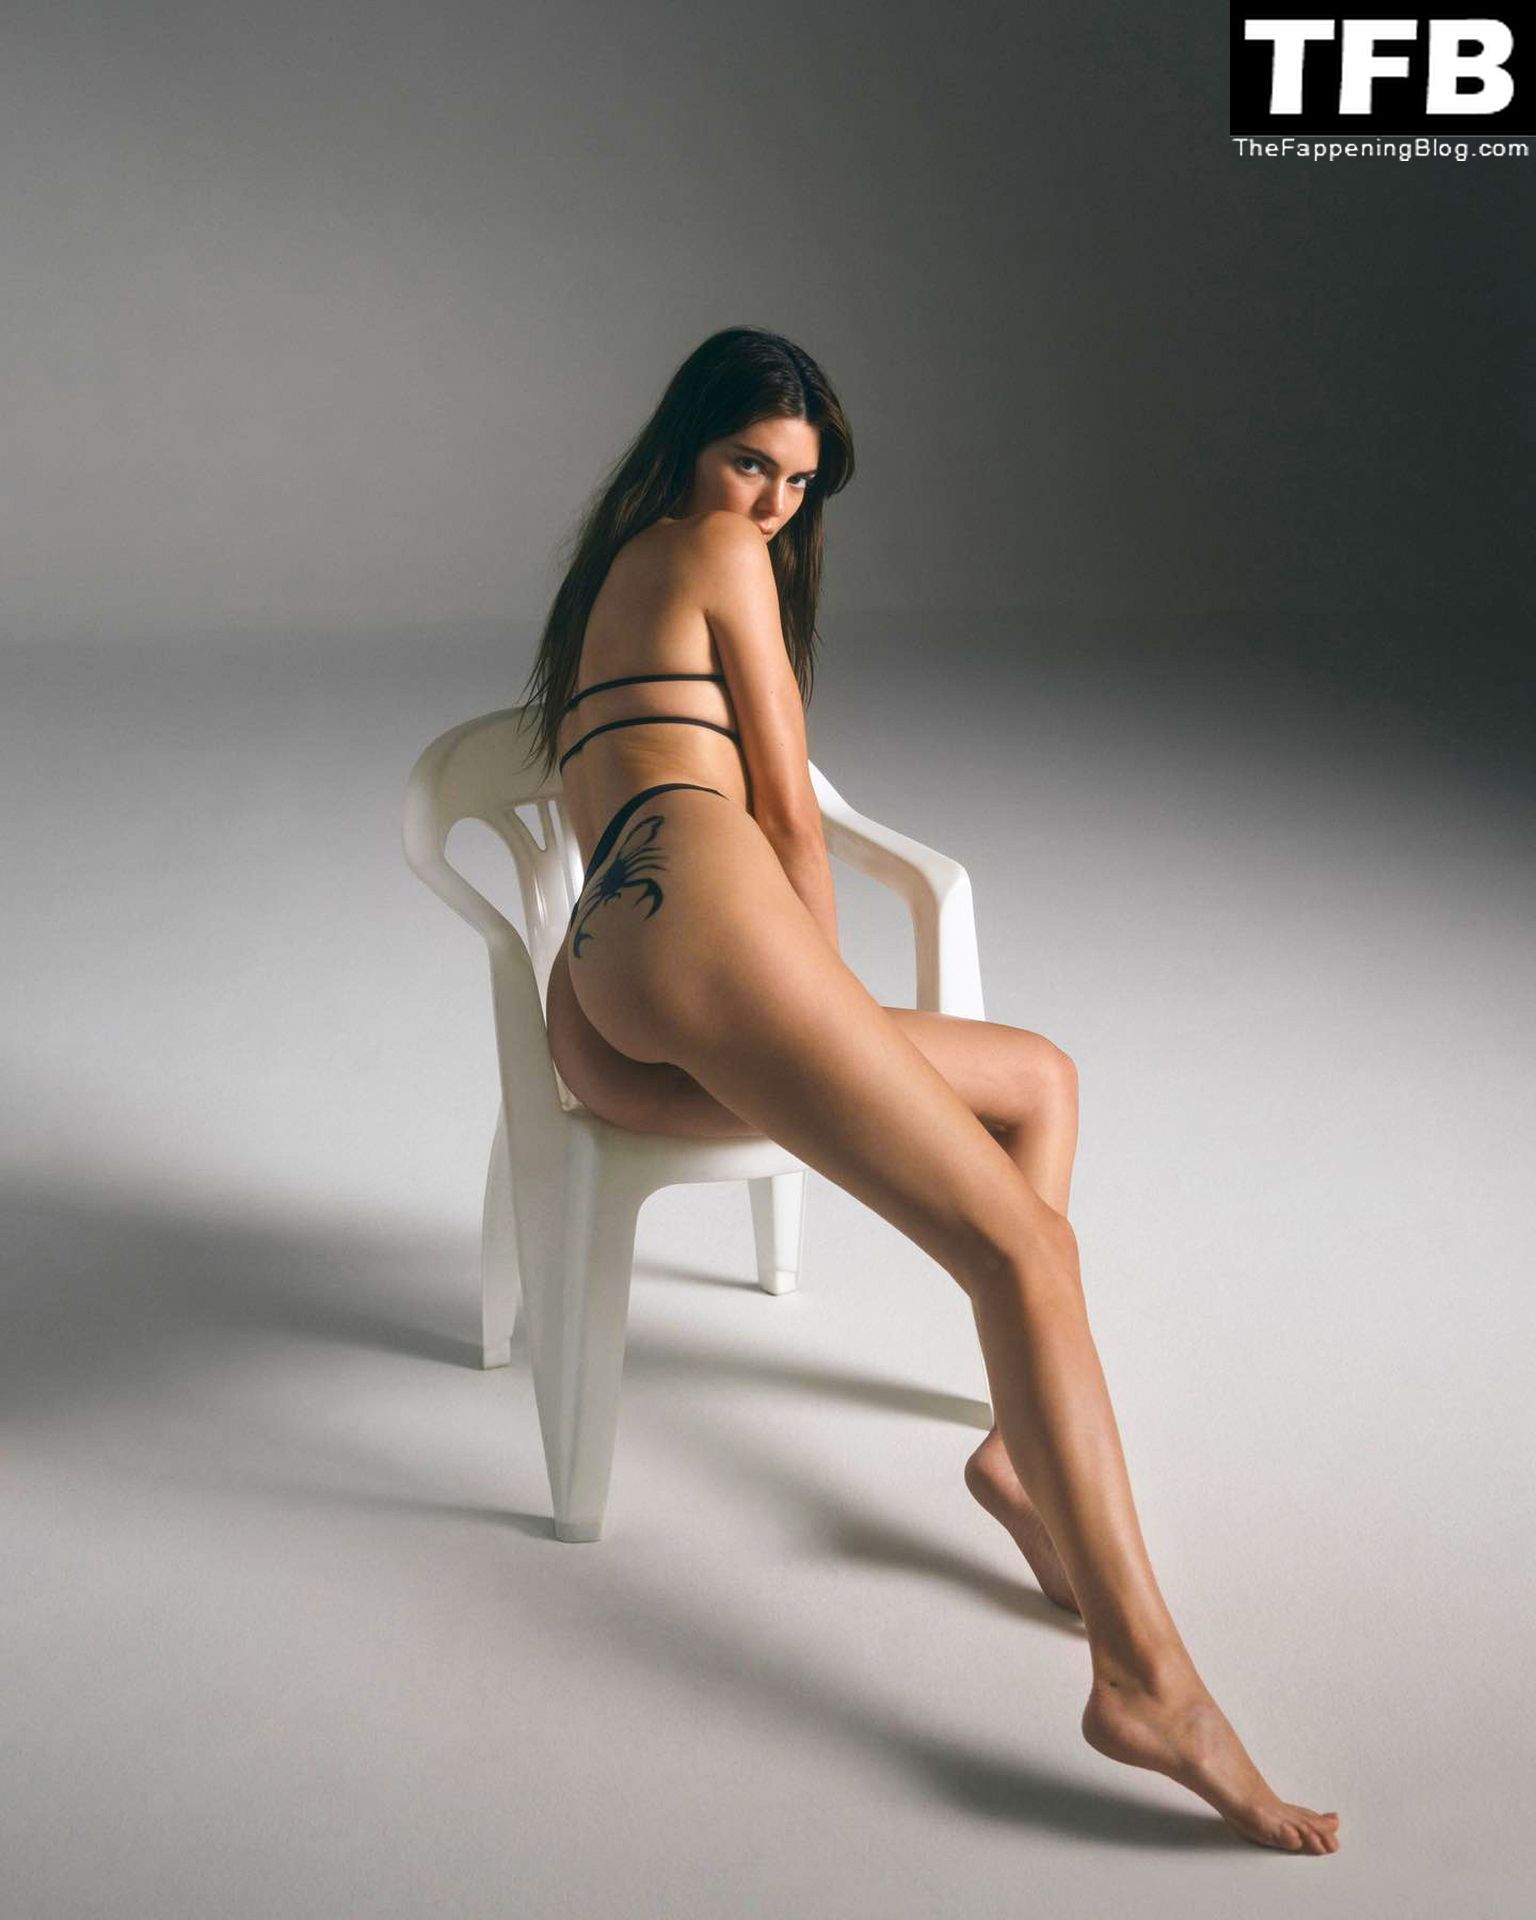 Kendall Jenner Topless & Sexy – Pop Magazine Issue 47 (12 Photos + Video)